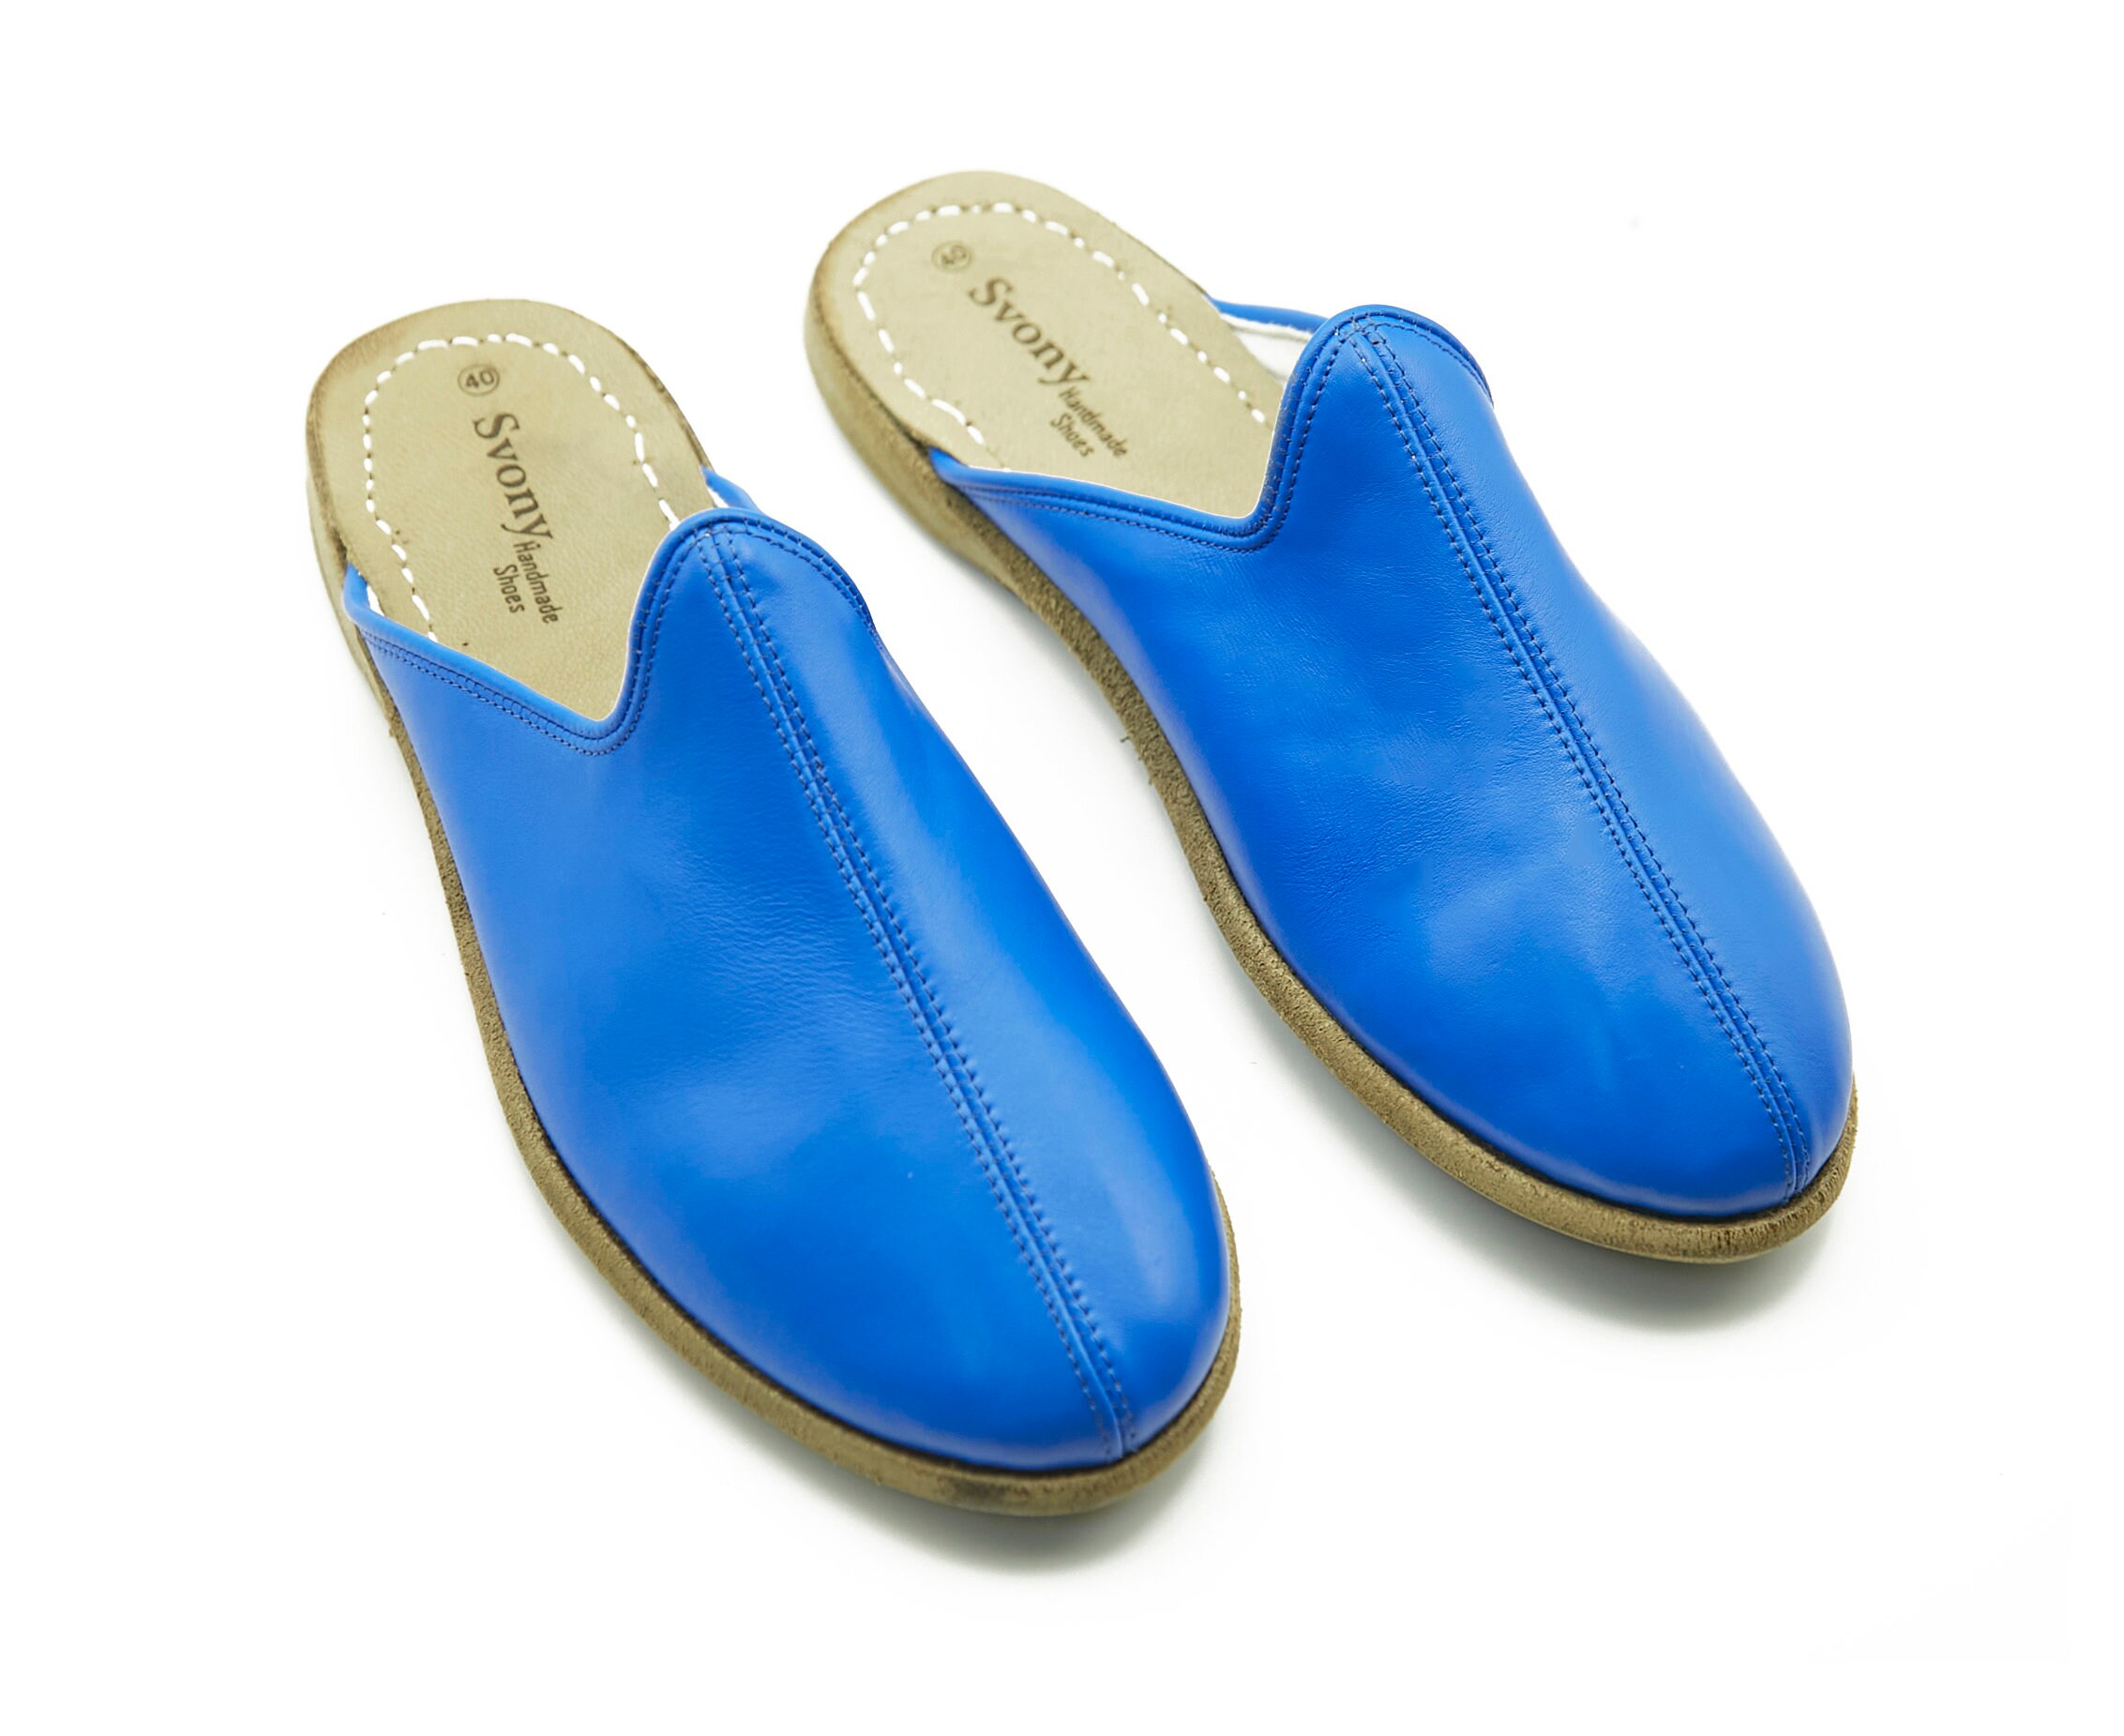 Ladies soft blue leather slippers*EU HAND MADE PRODUCT*size 4,5,6,7,8 